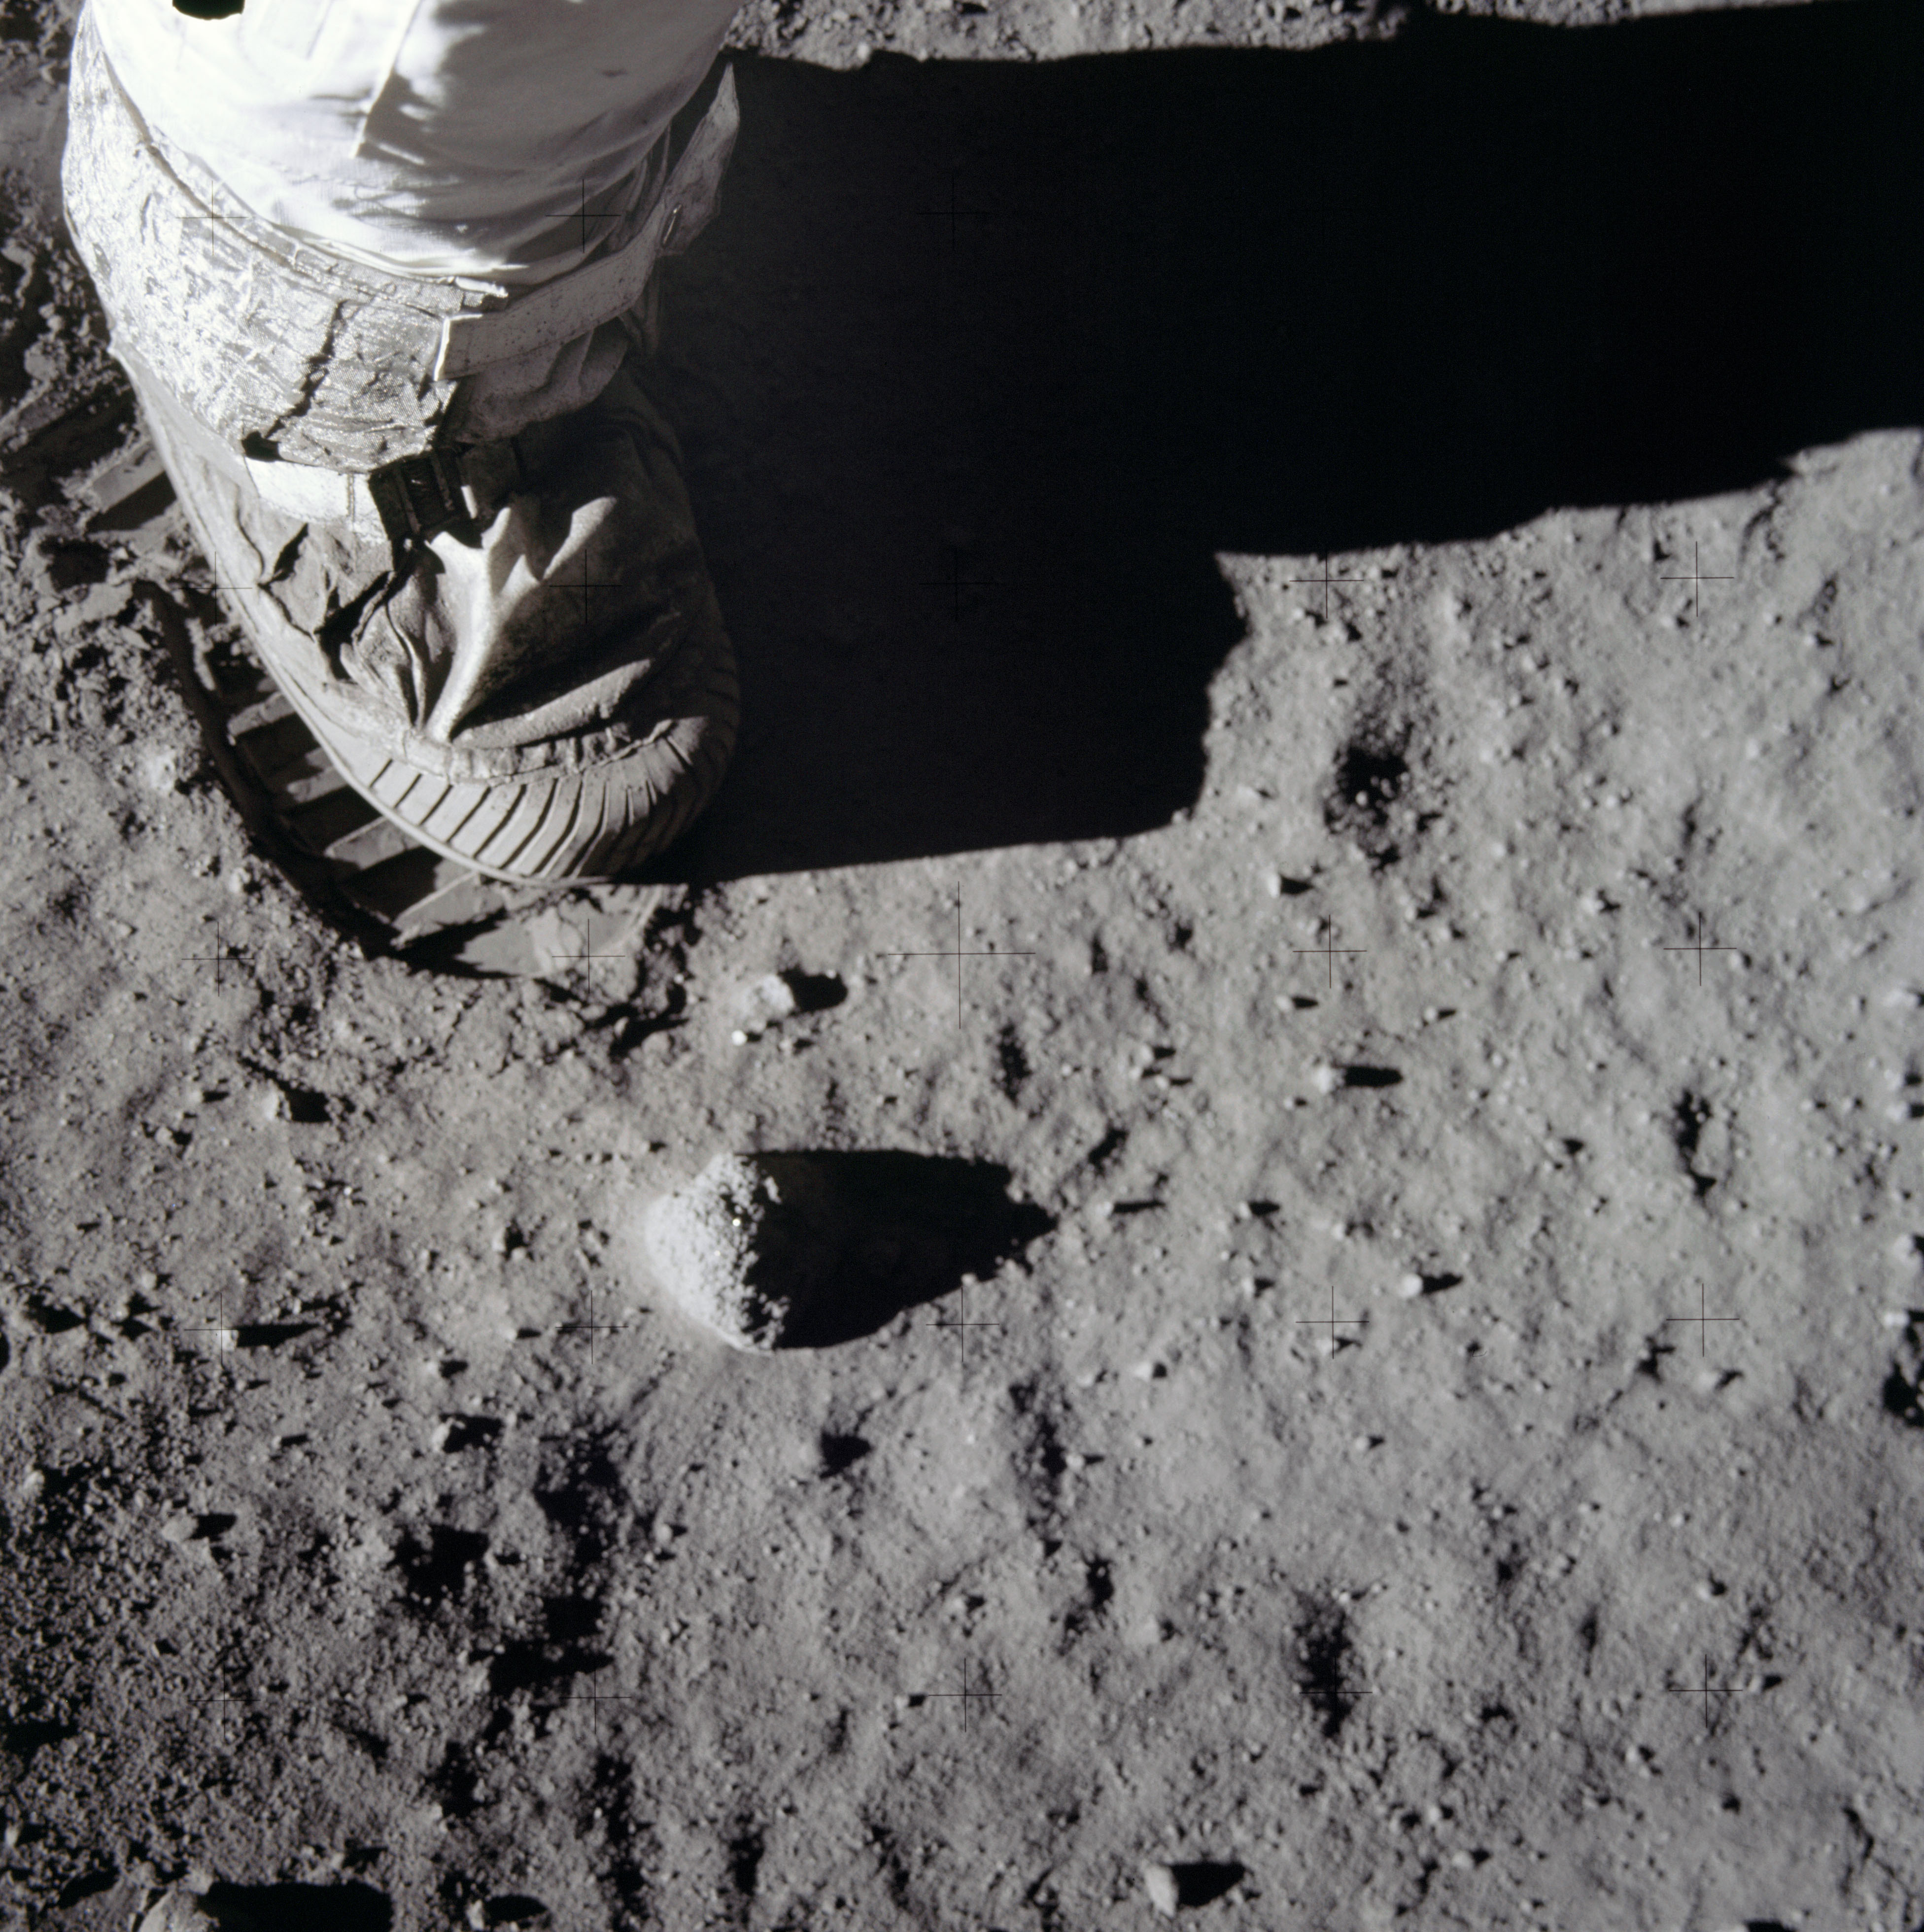 Astronaut Buzz Aldrin leaves a footprint in the moon dust during the historic Moonwalking on July 21, 1969.